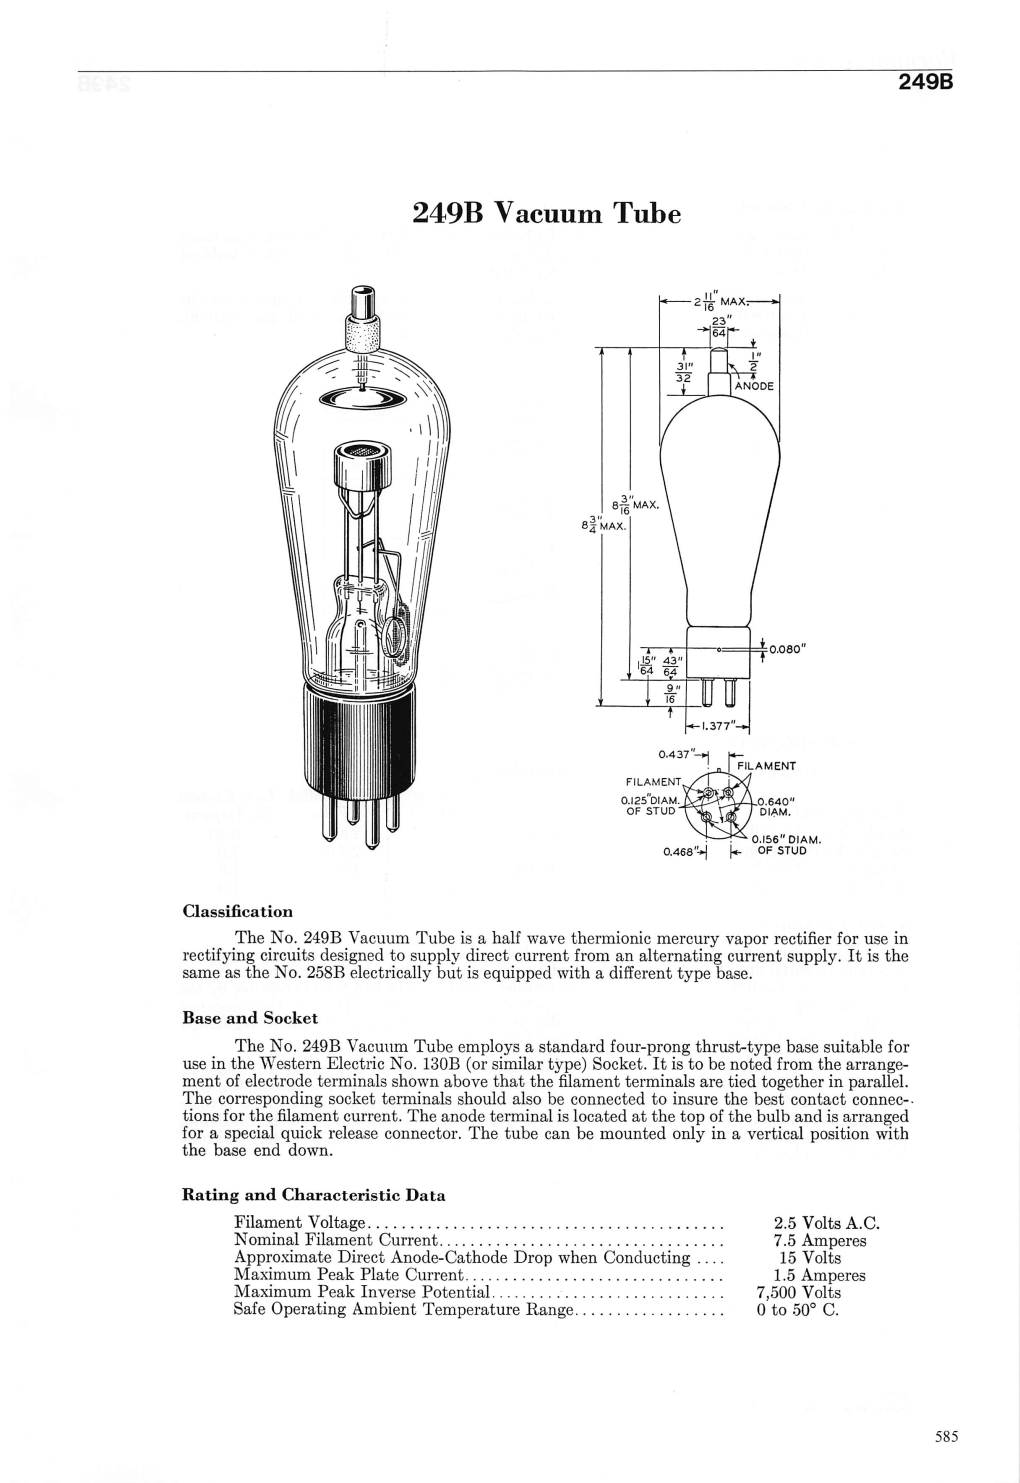 249B Vacuum Tube Is a Half Wave Thermionic Mercury Vapor Rectiﬁer for Use in Rectifying Circuits Designed to Supply Direct Current from an Alternating Current Supply